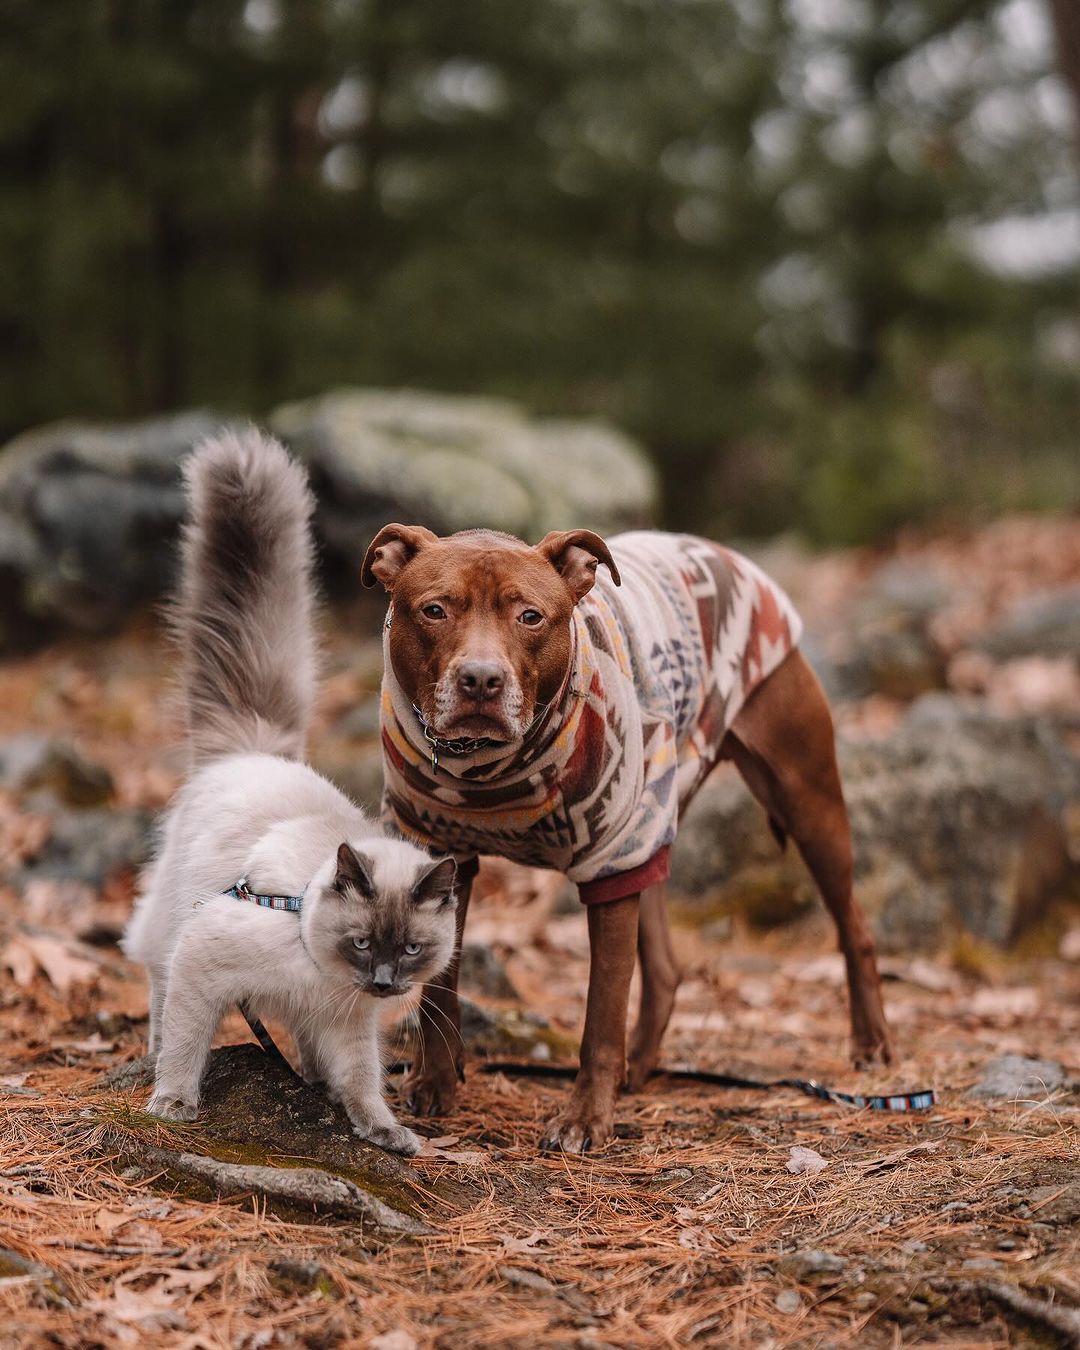 cat and dog in the nature